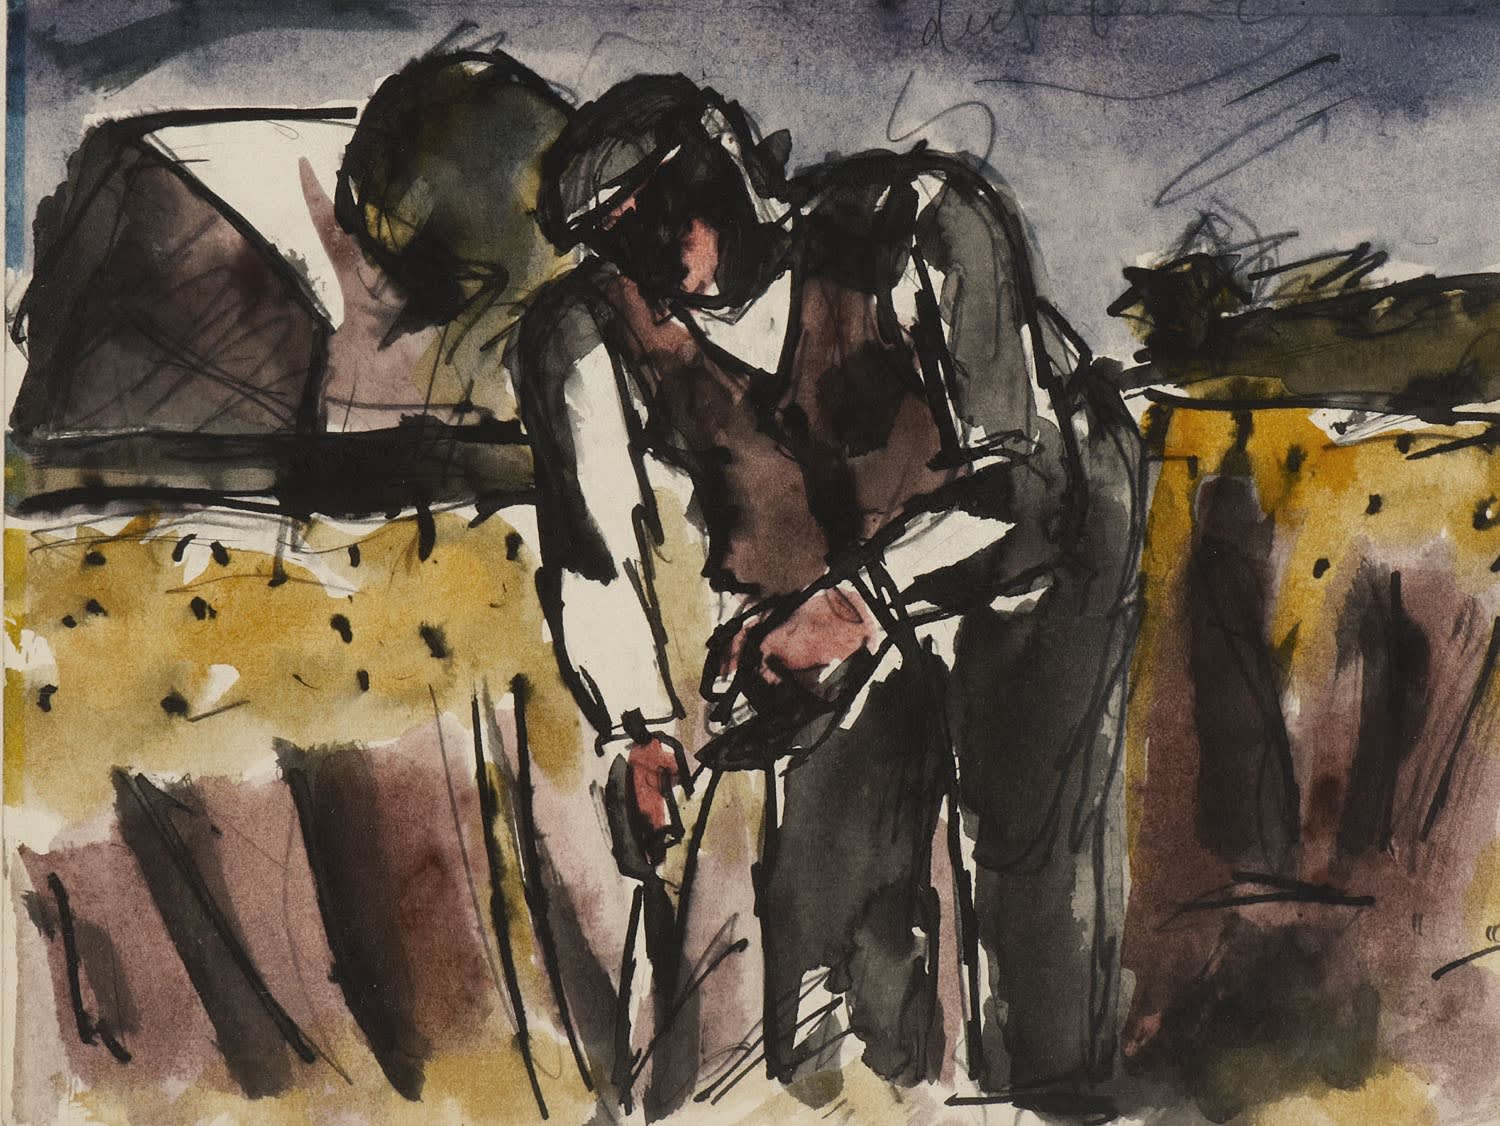 Josef Herman (1911-2000) Peasant n.d. Watercolour, pen and ink on paper 18.2 x 22.5 cm Ben Uri Collection © Josef Herman estate To see and discover more about this artist click here